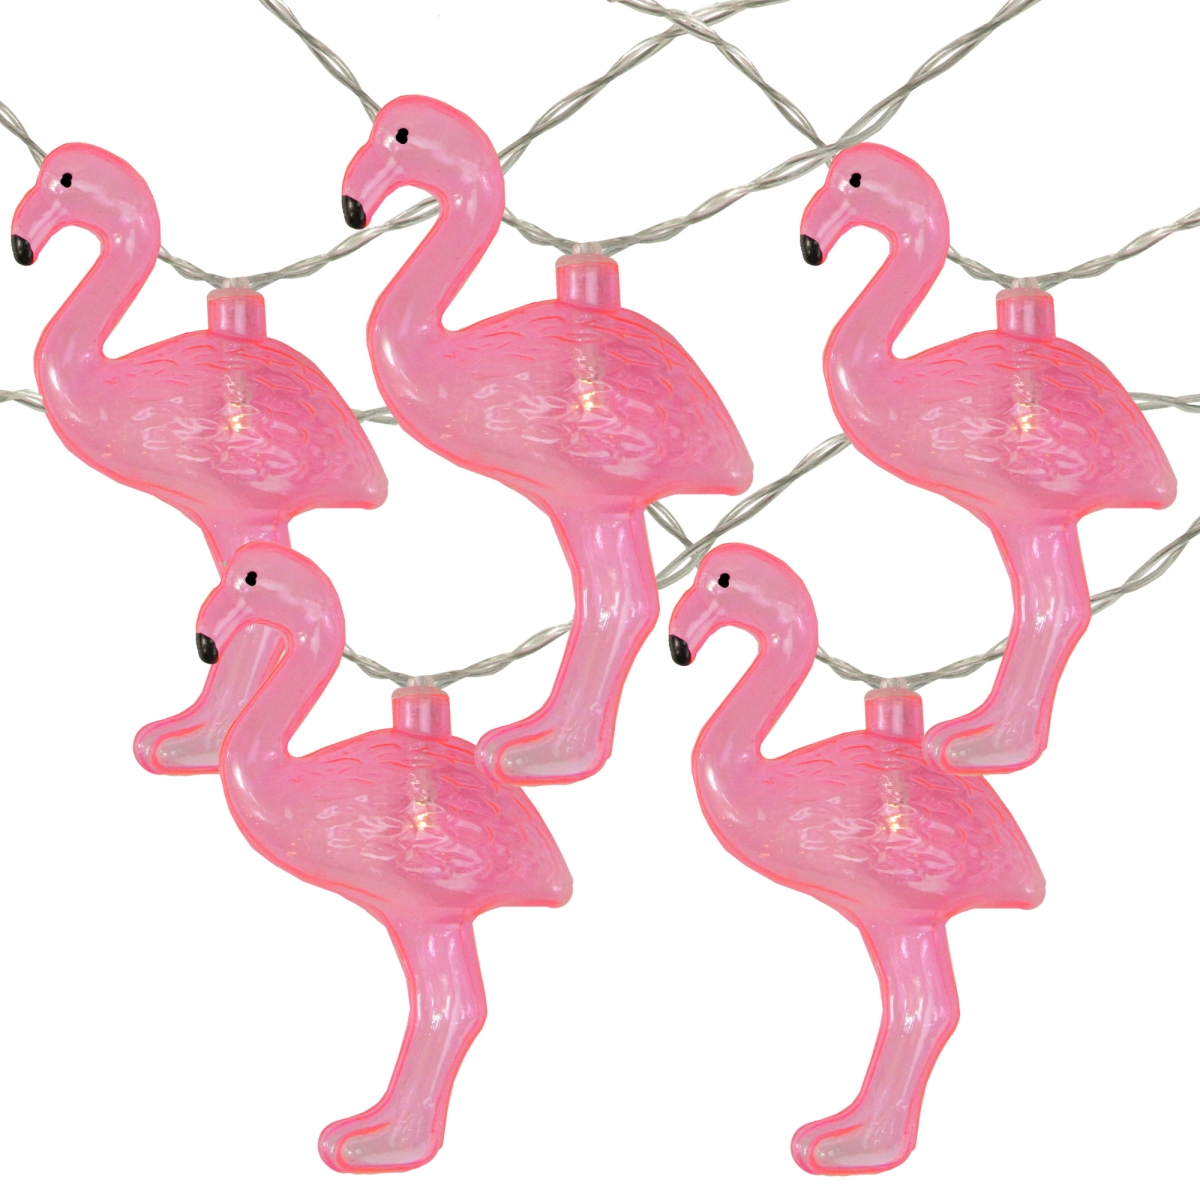 33377746 4.5 Ft. 10 Battery Operated Pink Flamingo Summer Led String Lights - Clear Wire